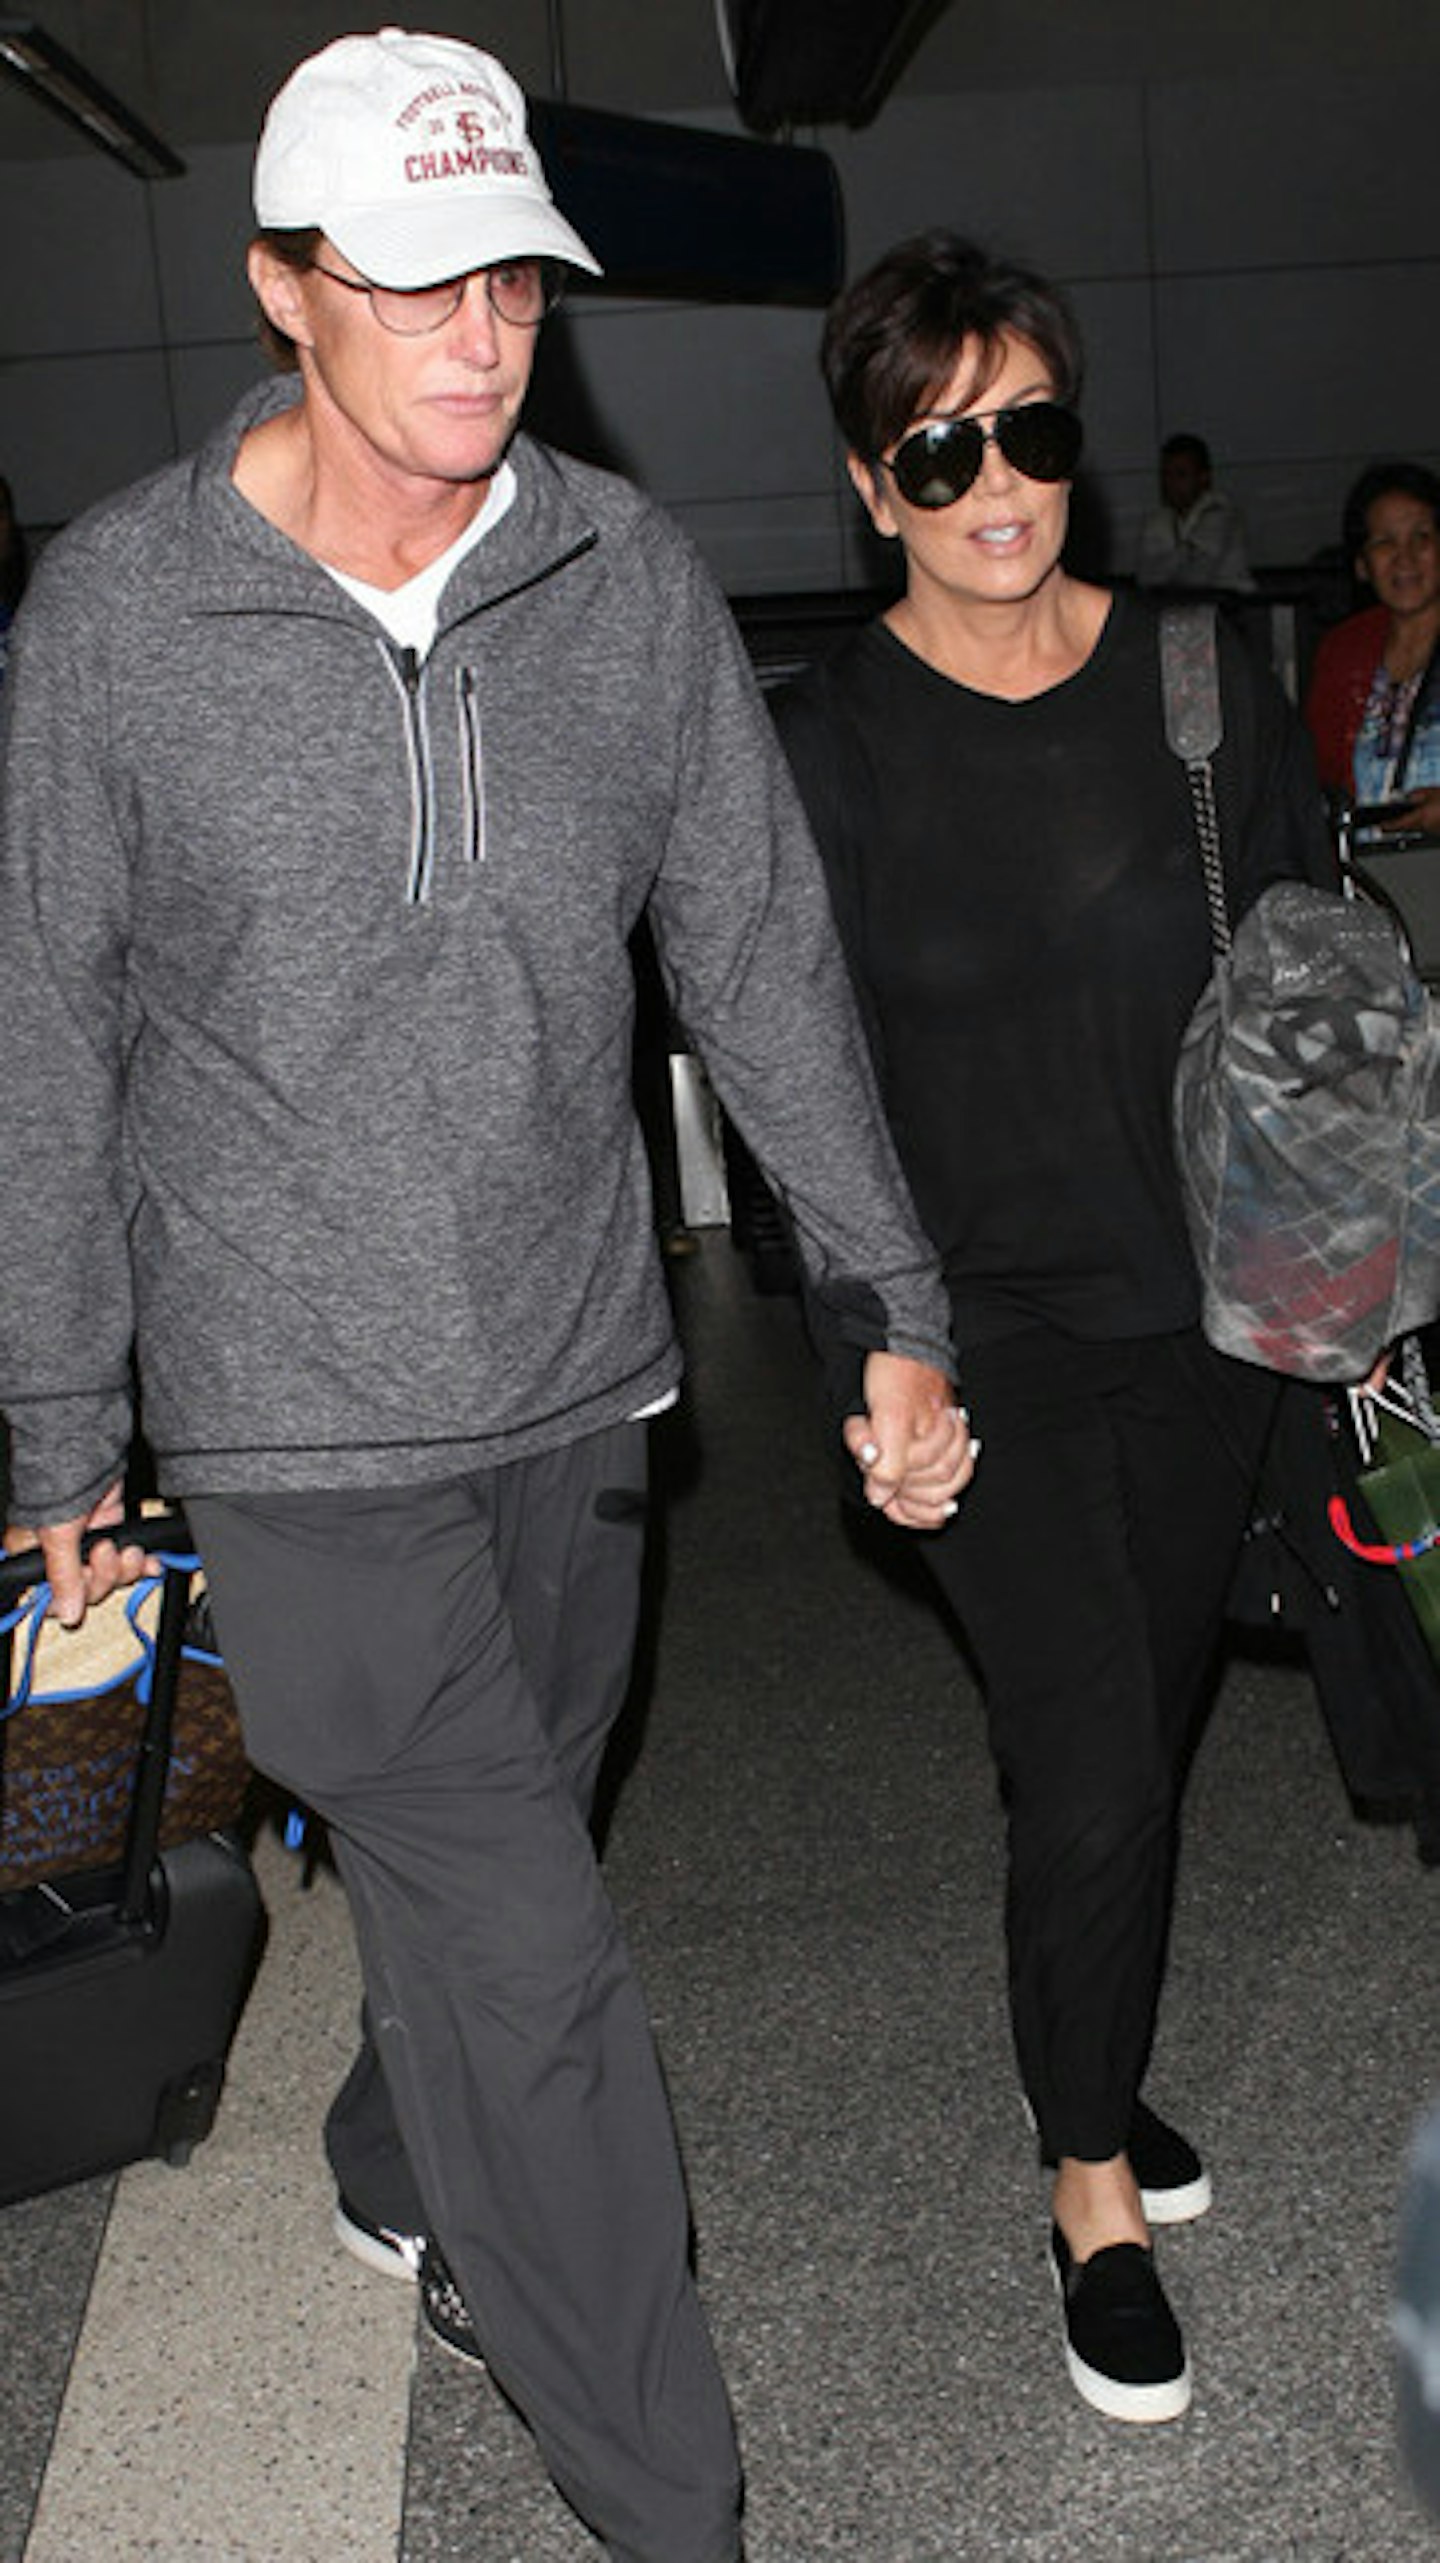 Kris Jenner and ex-husband Bruce were spotted holding hands recently